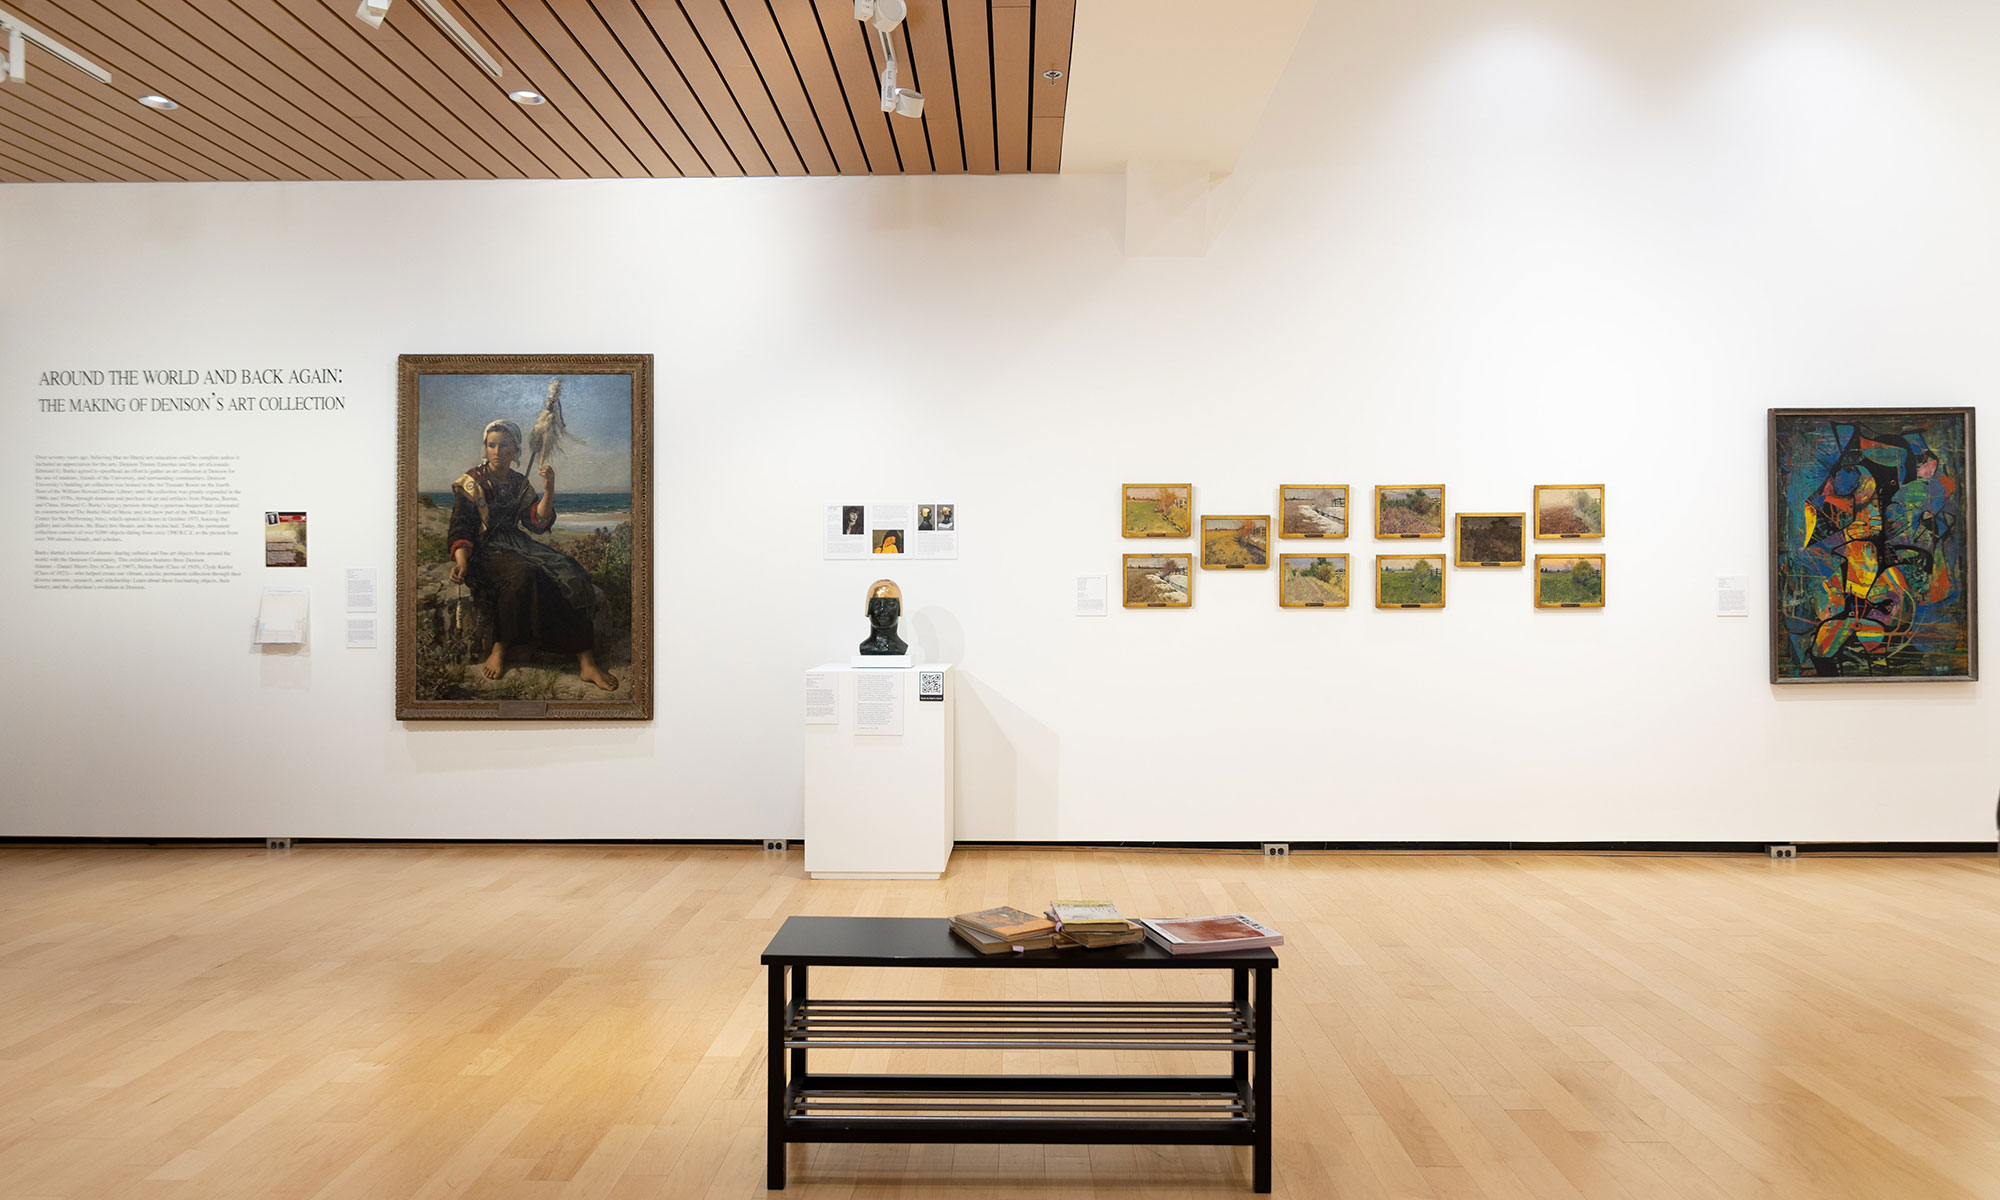 Around the World and back again: the making of Denison’s Art Collection